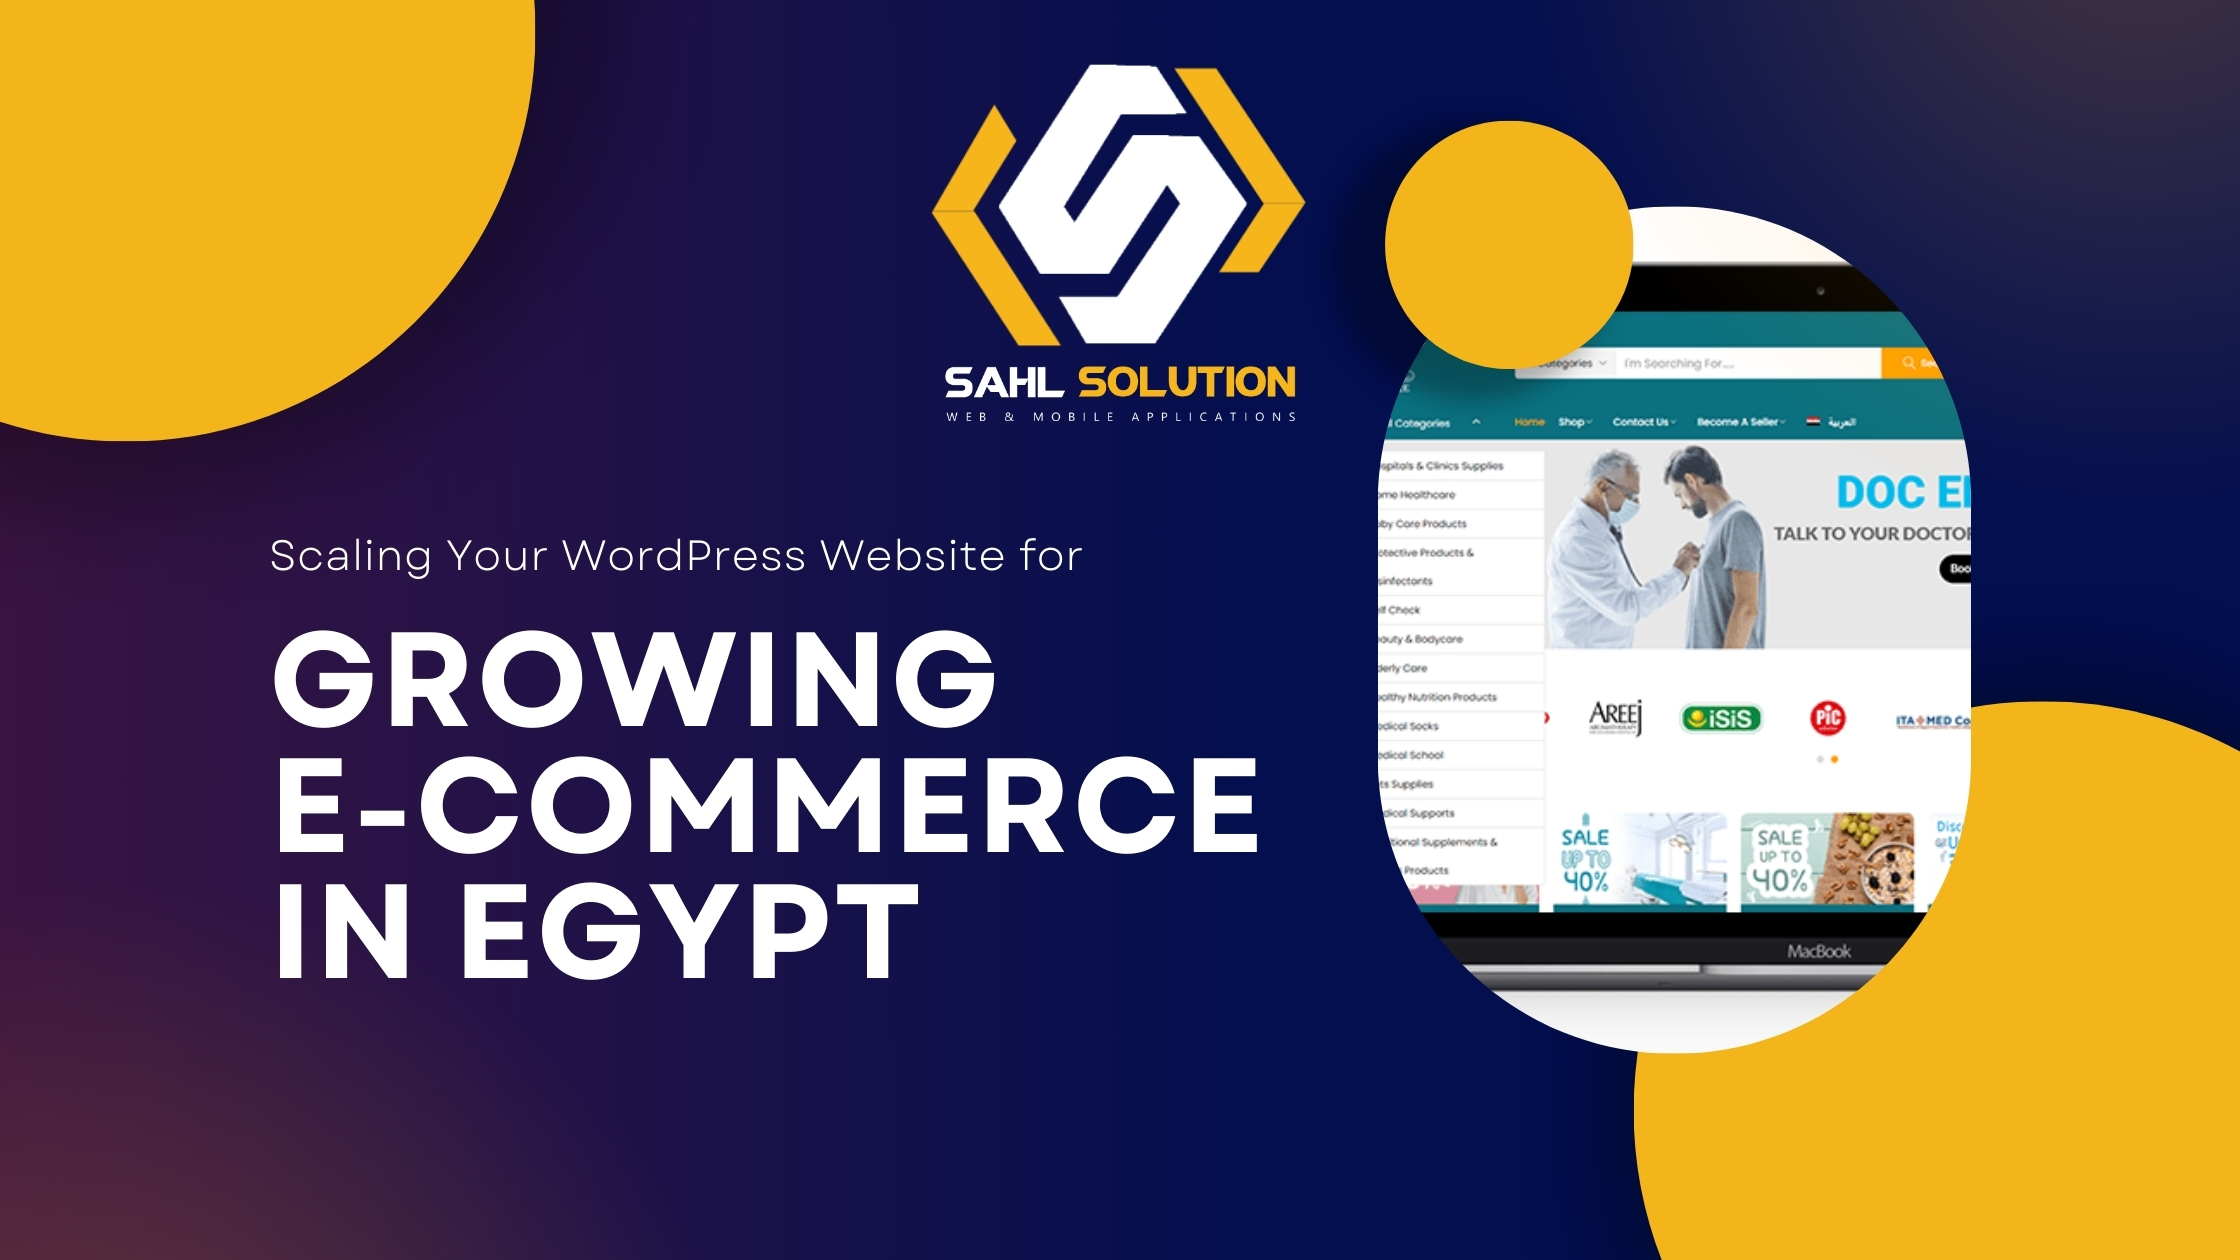 Scaling Your WordPress Website for Growing E-commerce in Egypt